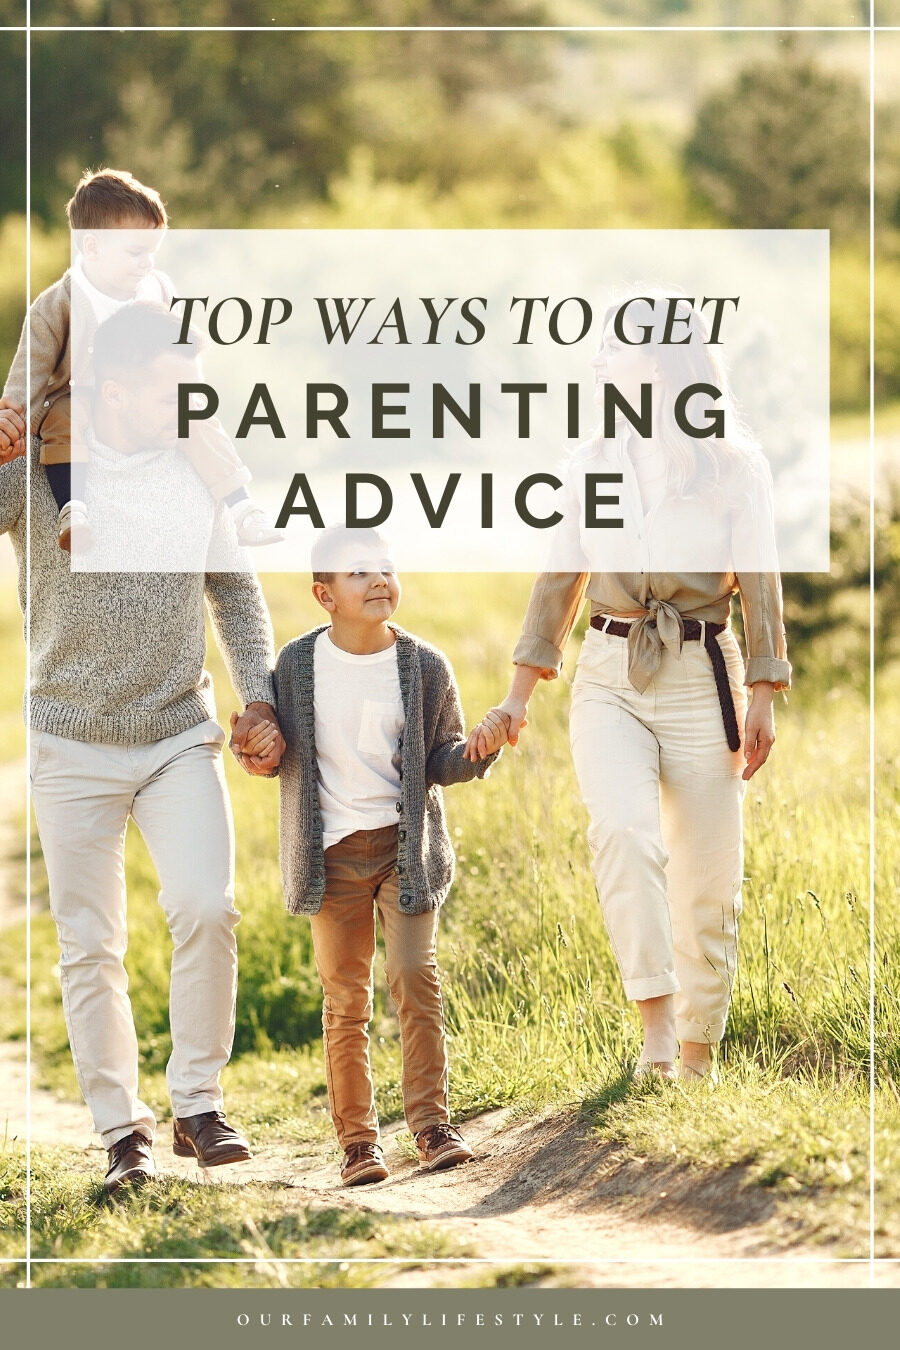 What Are The Top Ways To Get Parenting Advice